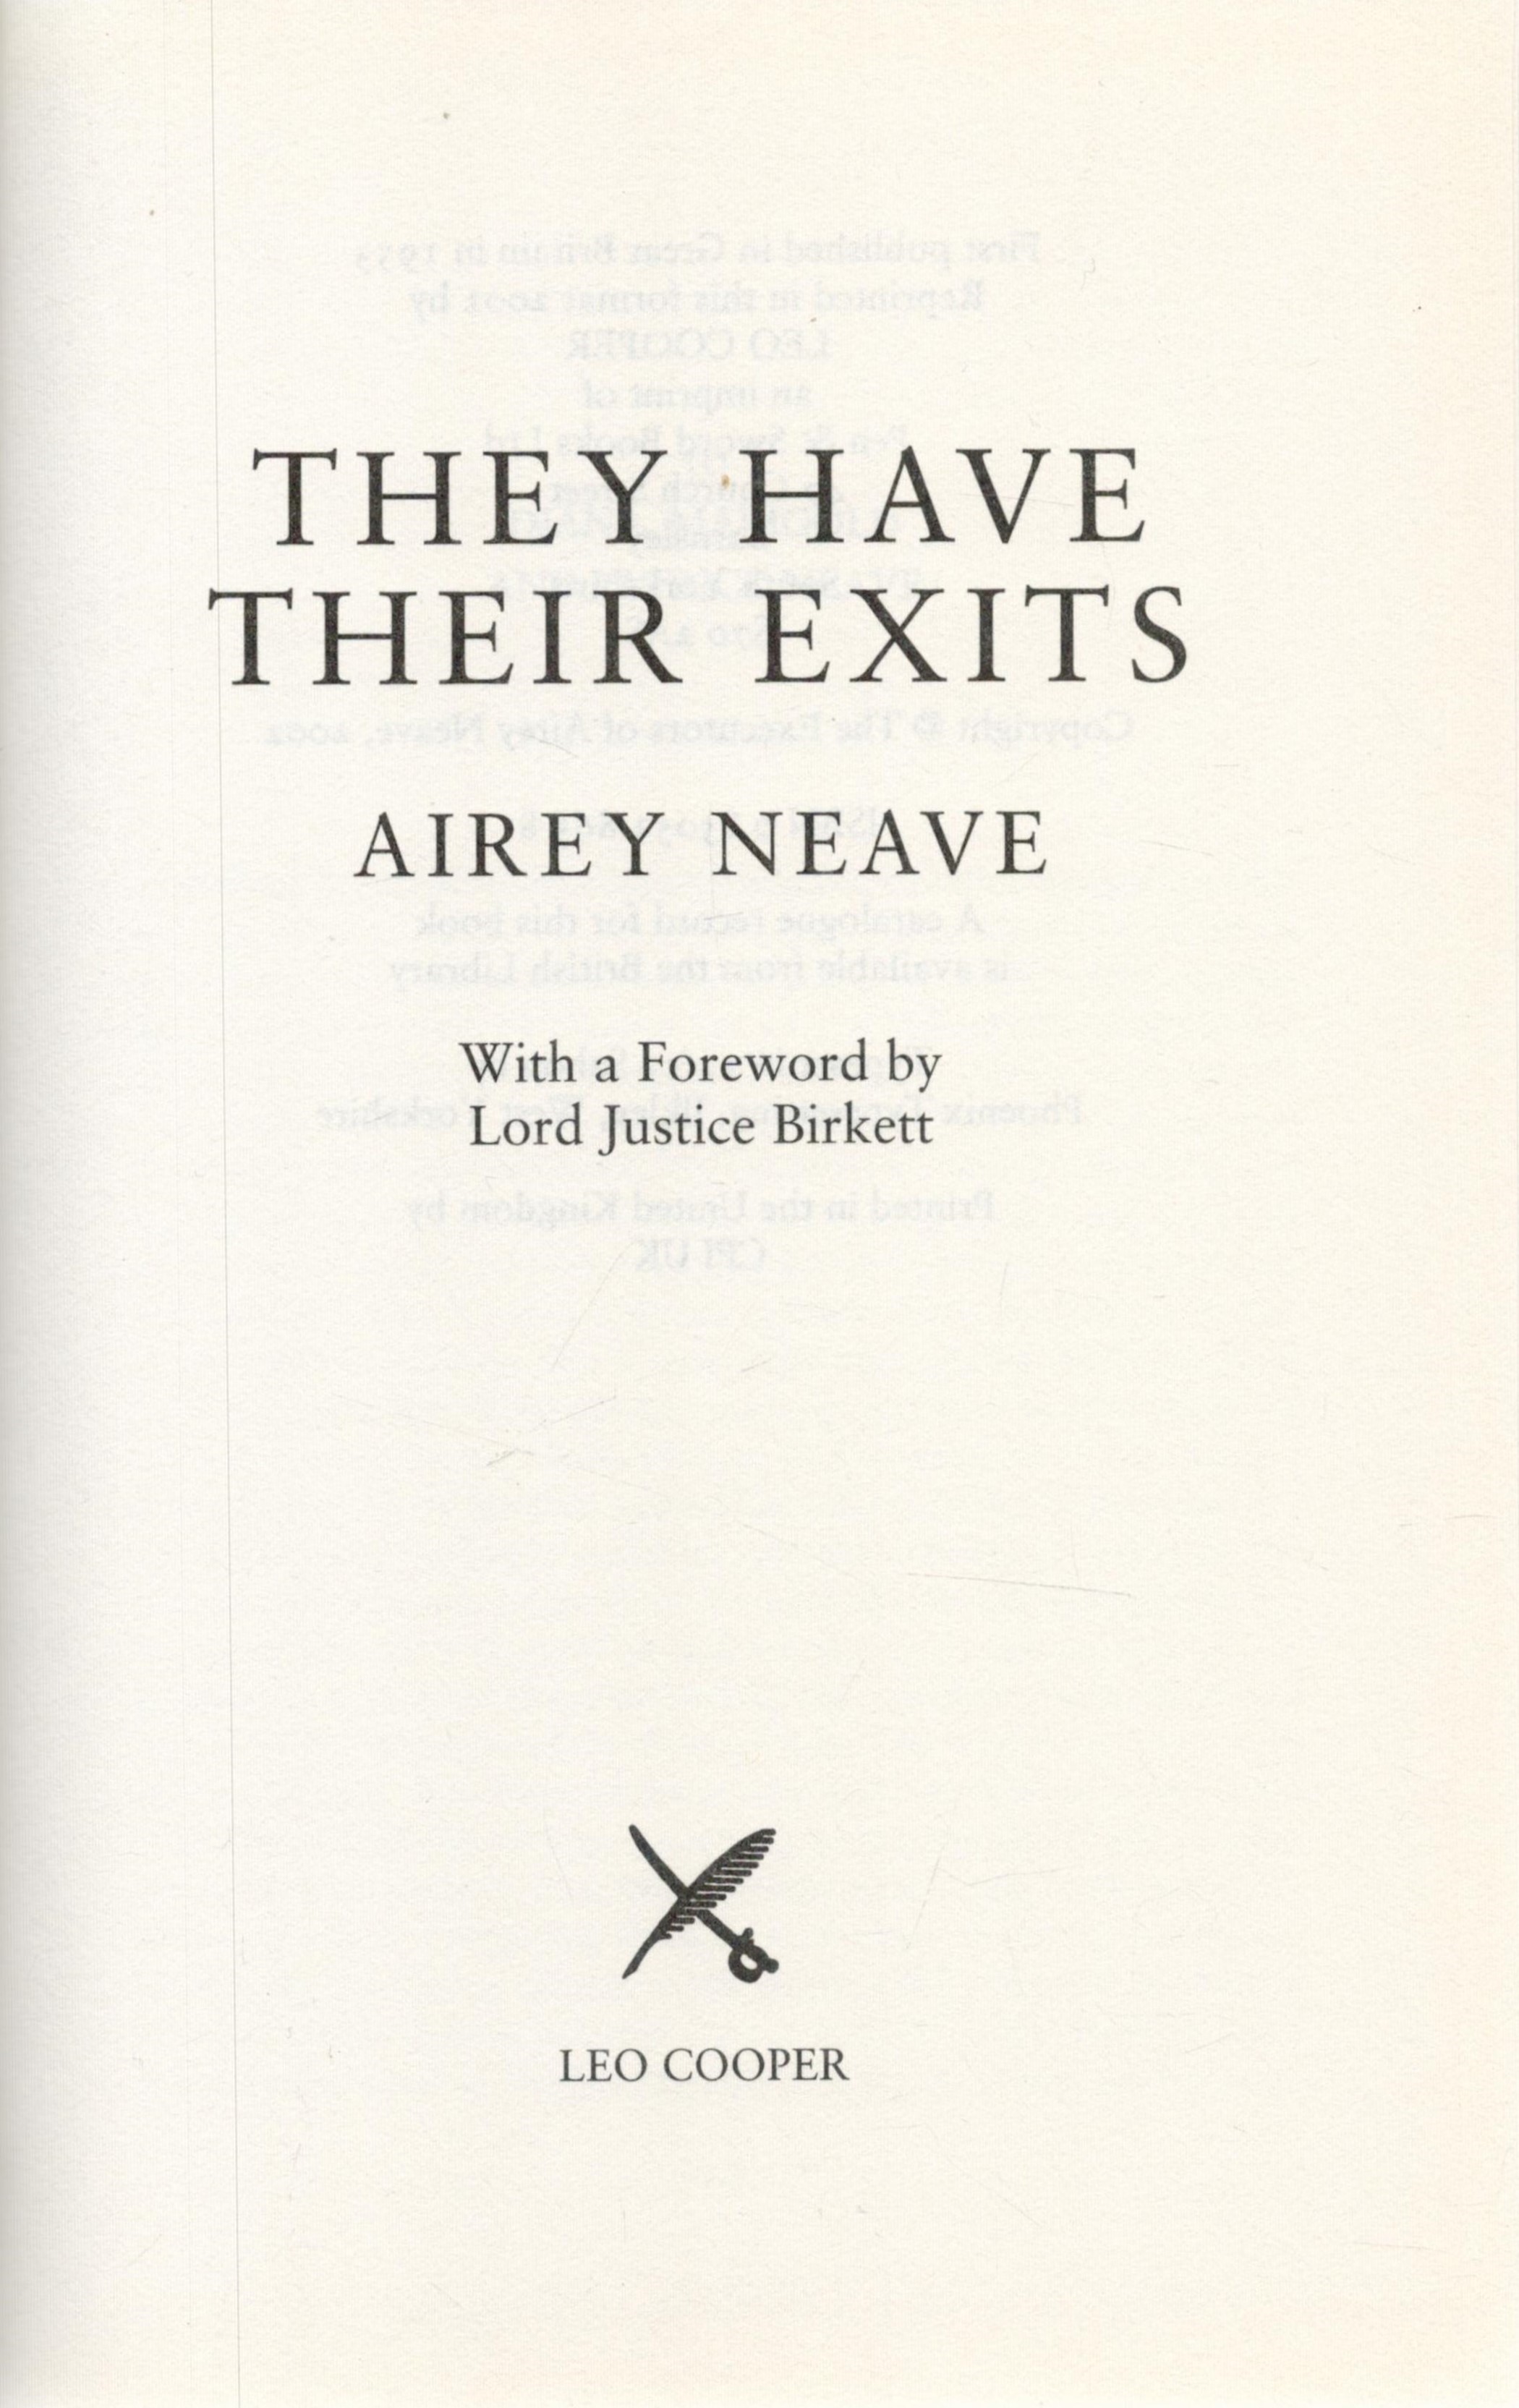 They Have Their Exits Hardback Book By Airey Neave DSO OBE MC. Published in 2002. Good condition - Image 2 of 3